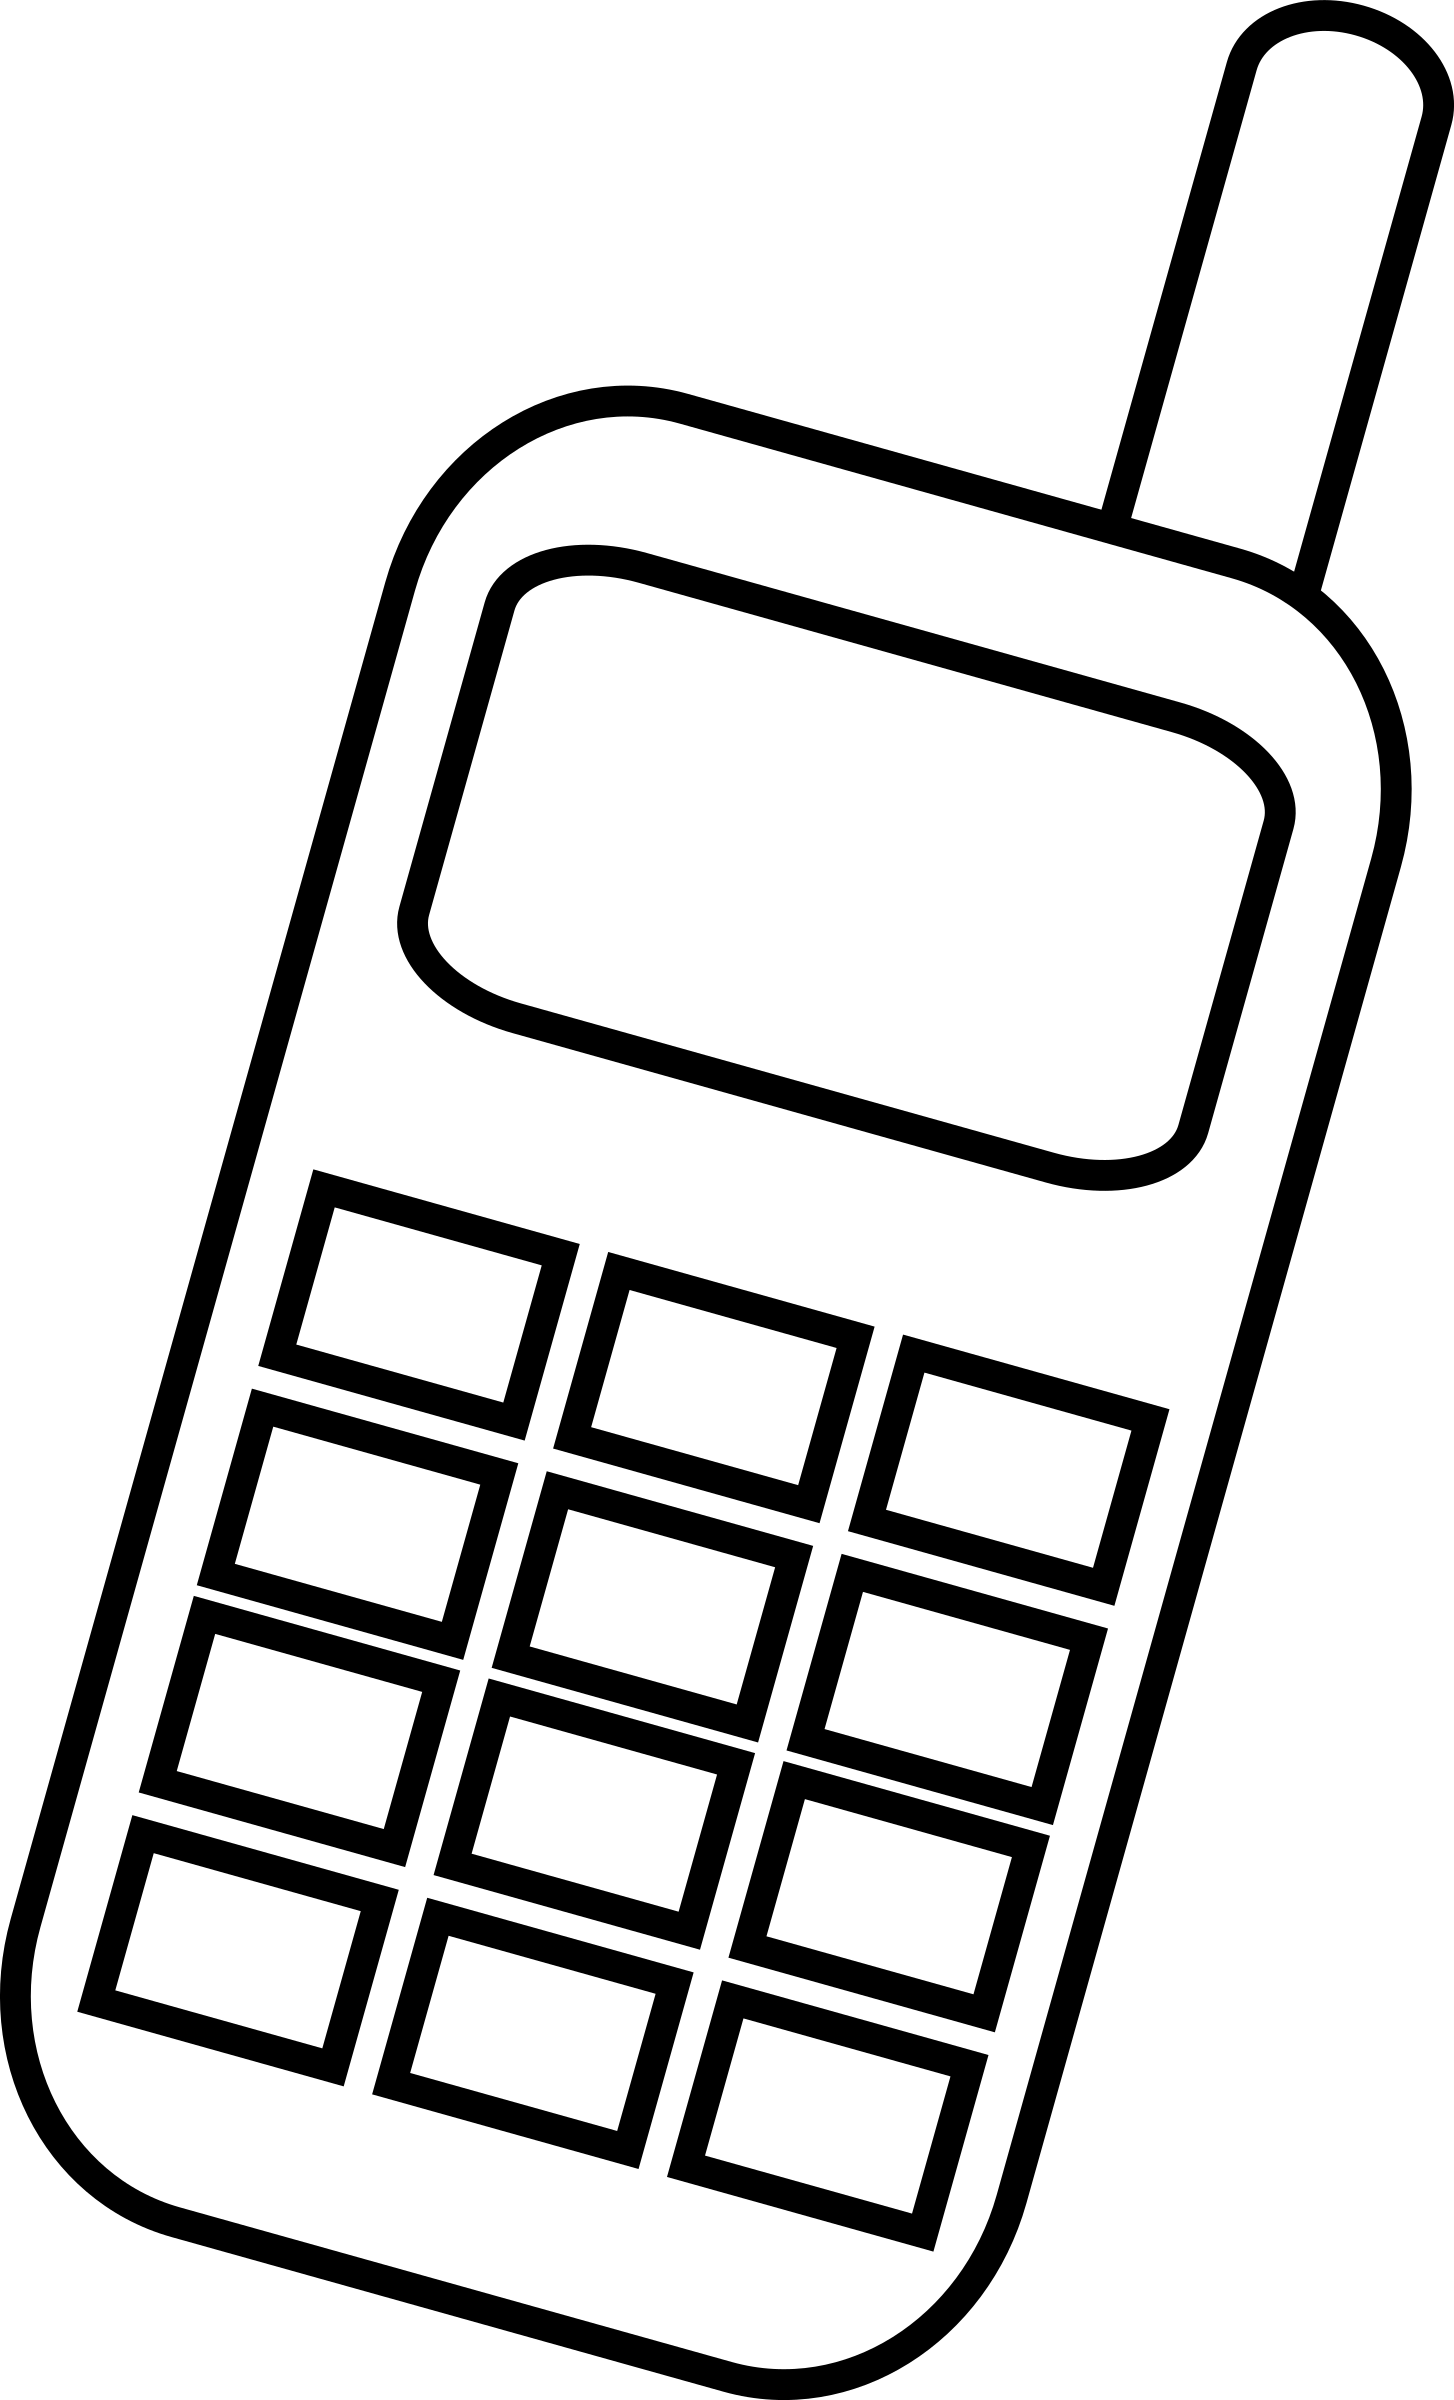 Telephone clipart draw, Telephone draw Transparent FREE for